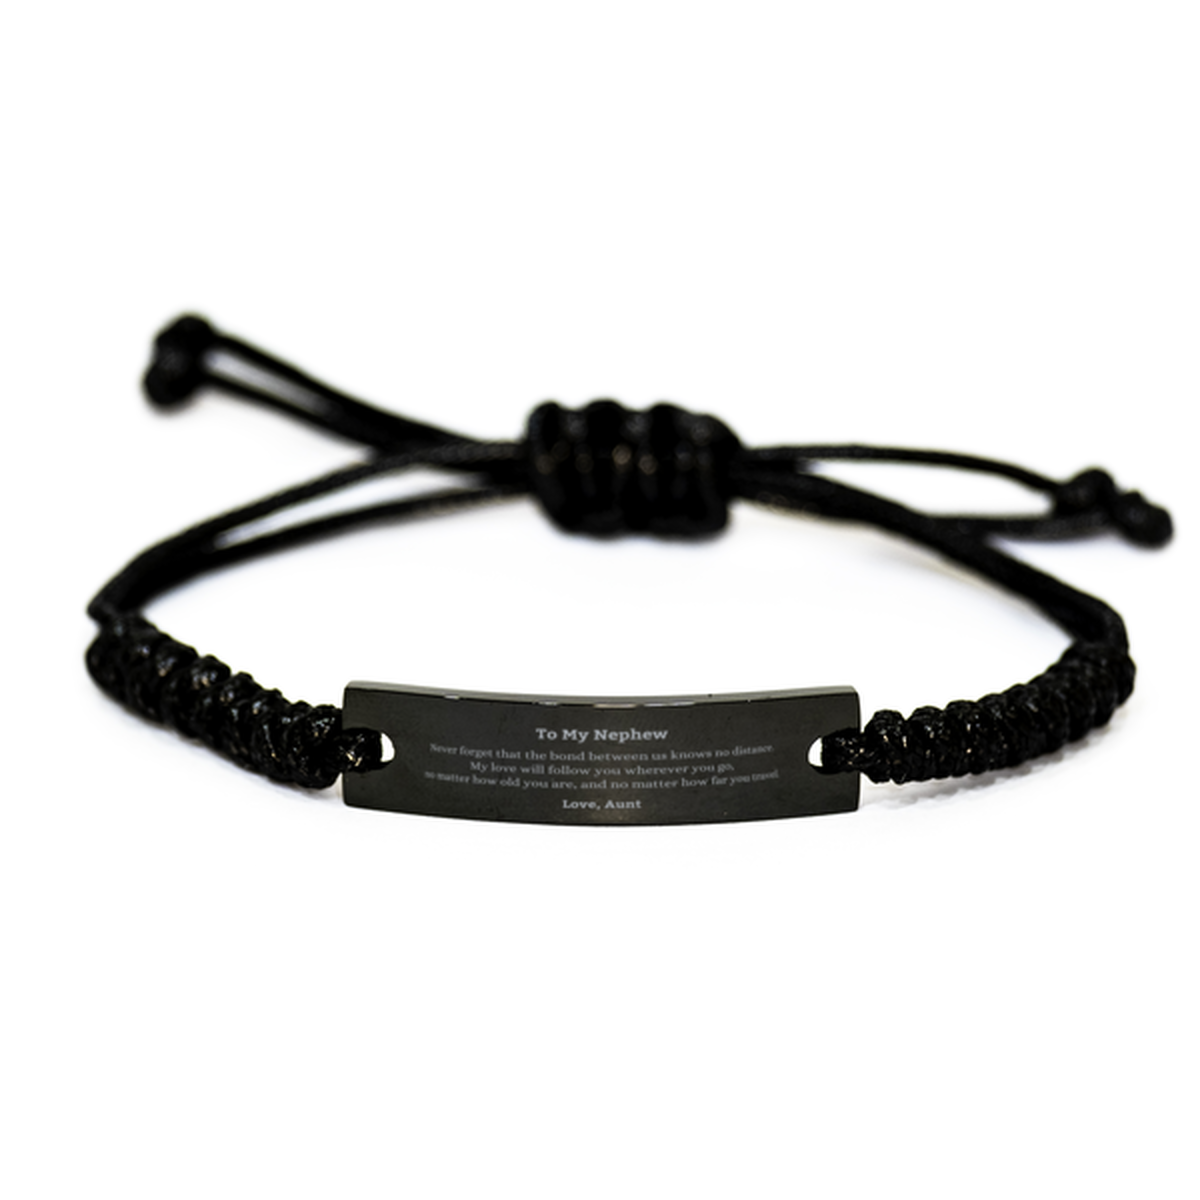 Nephew Birthday Gifts from Aunt, Adjustable Black Rope Bracelet for Nephew Christmas Graduation Unique Gifts Nephew Never forget that the bond between us knows no distance. Love, Aunt